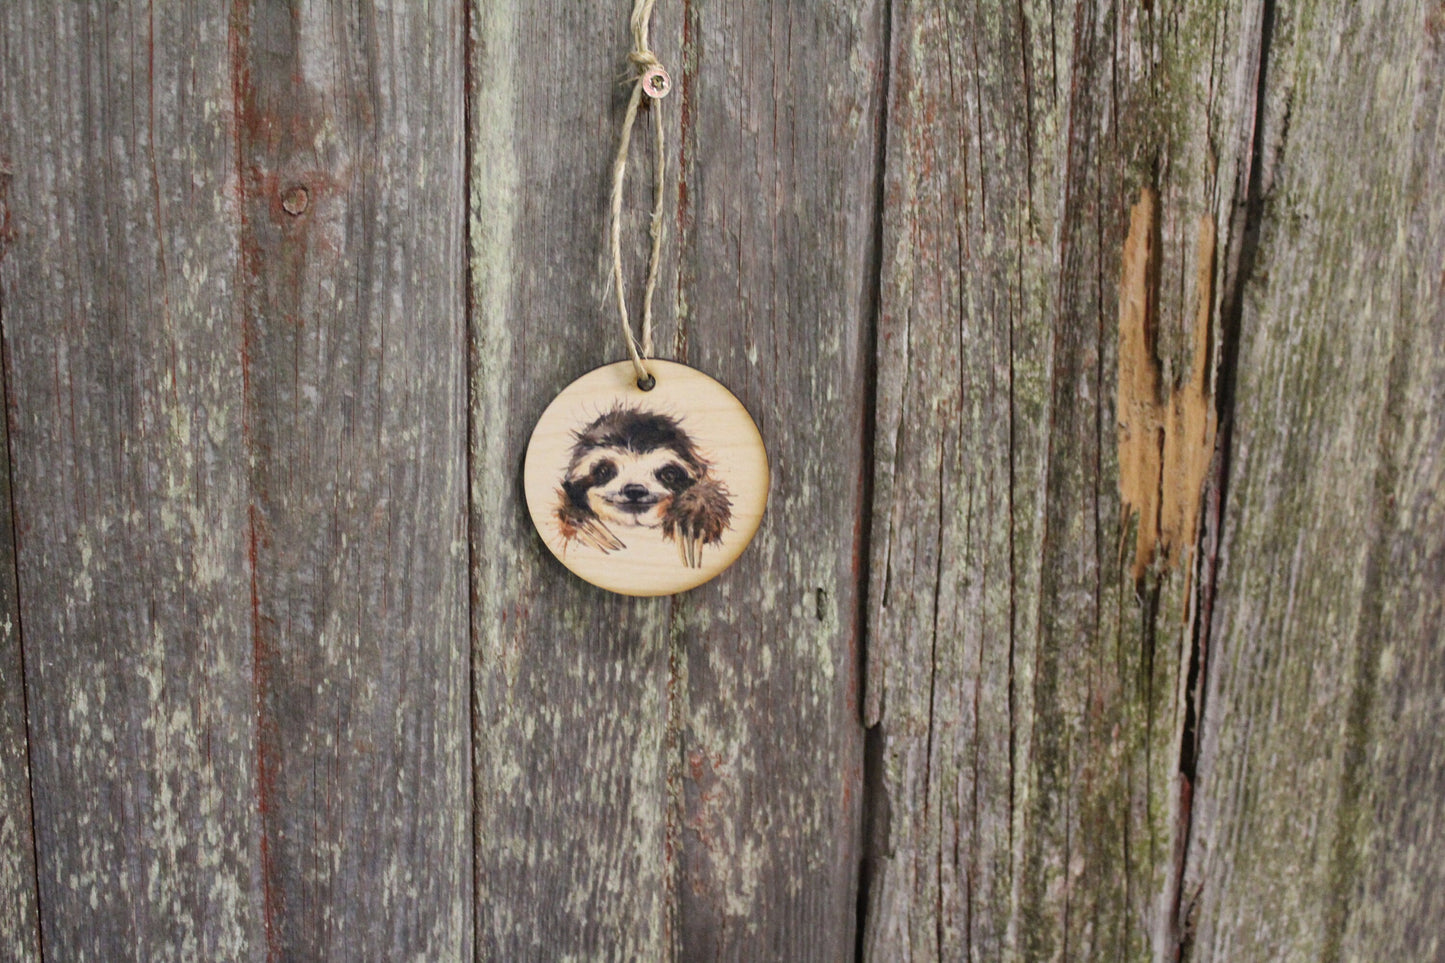 Sloth Face Ornament Watercolor Cute Detailed Claw Smile Keychain Décor Wood Circle Sign Gift Cute Unique